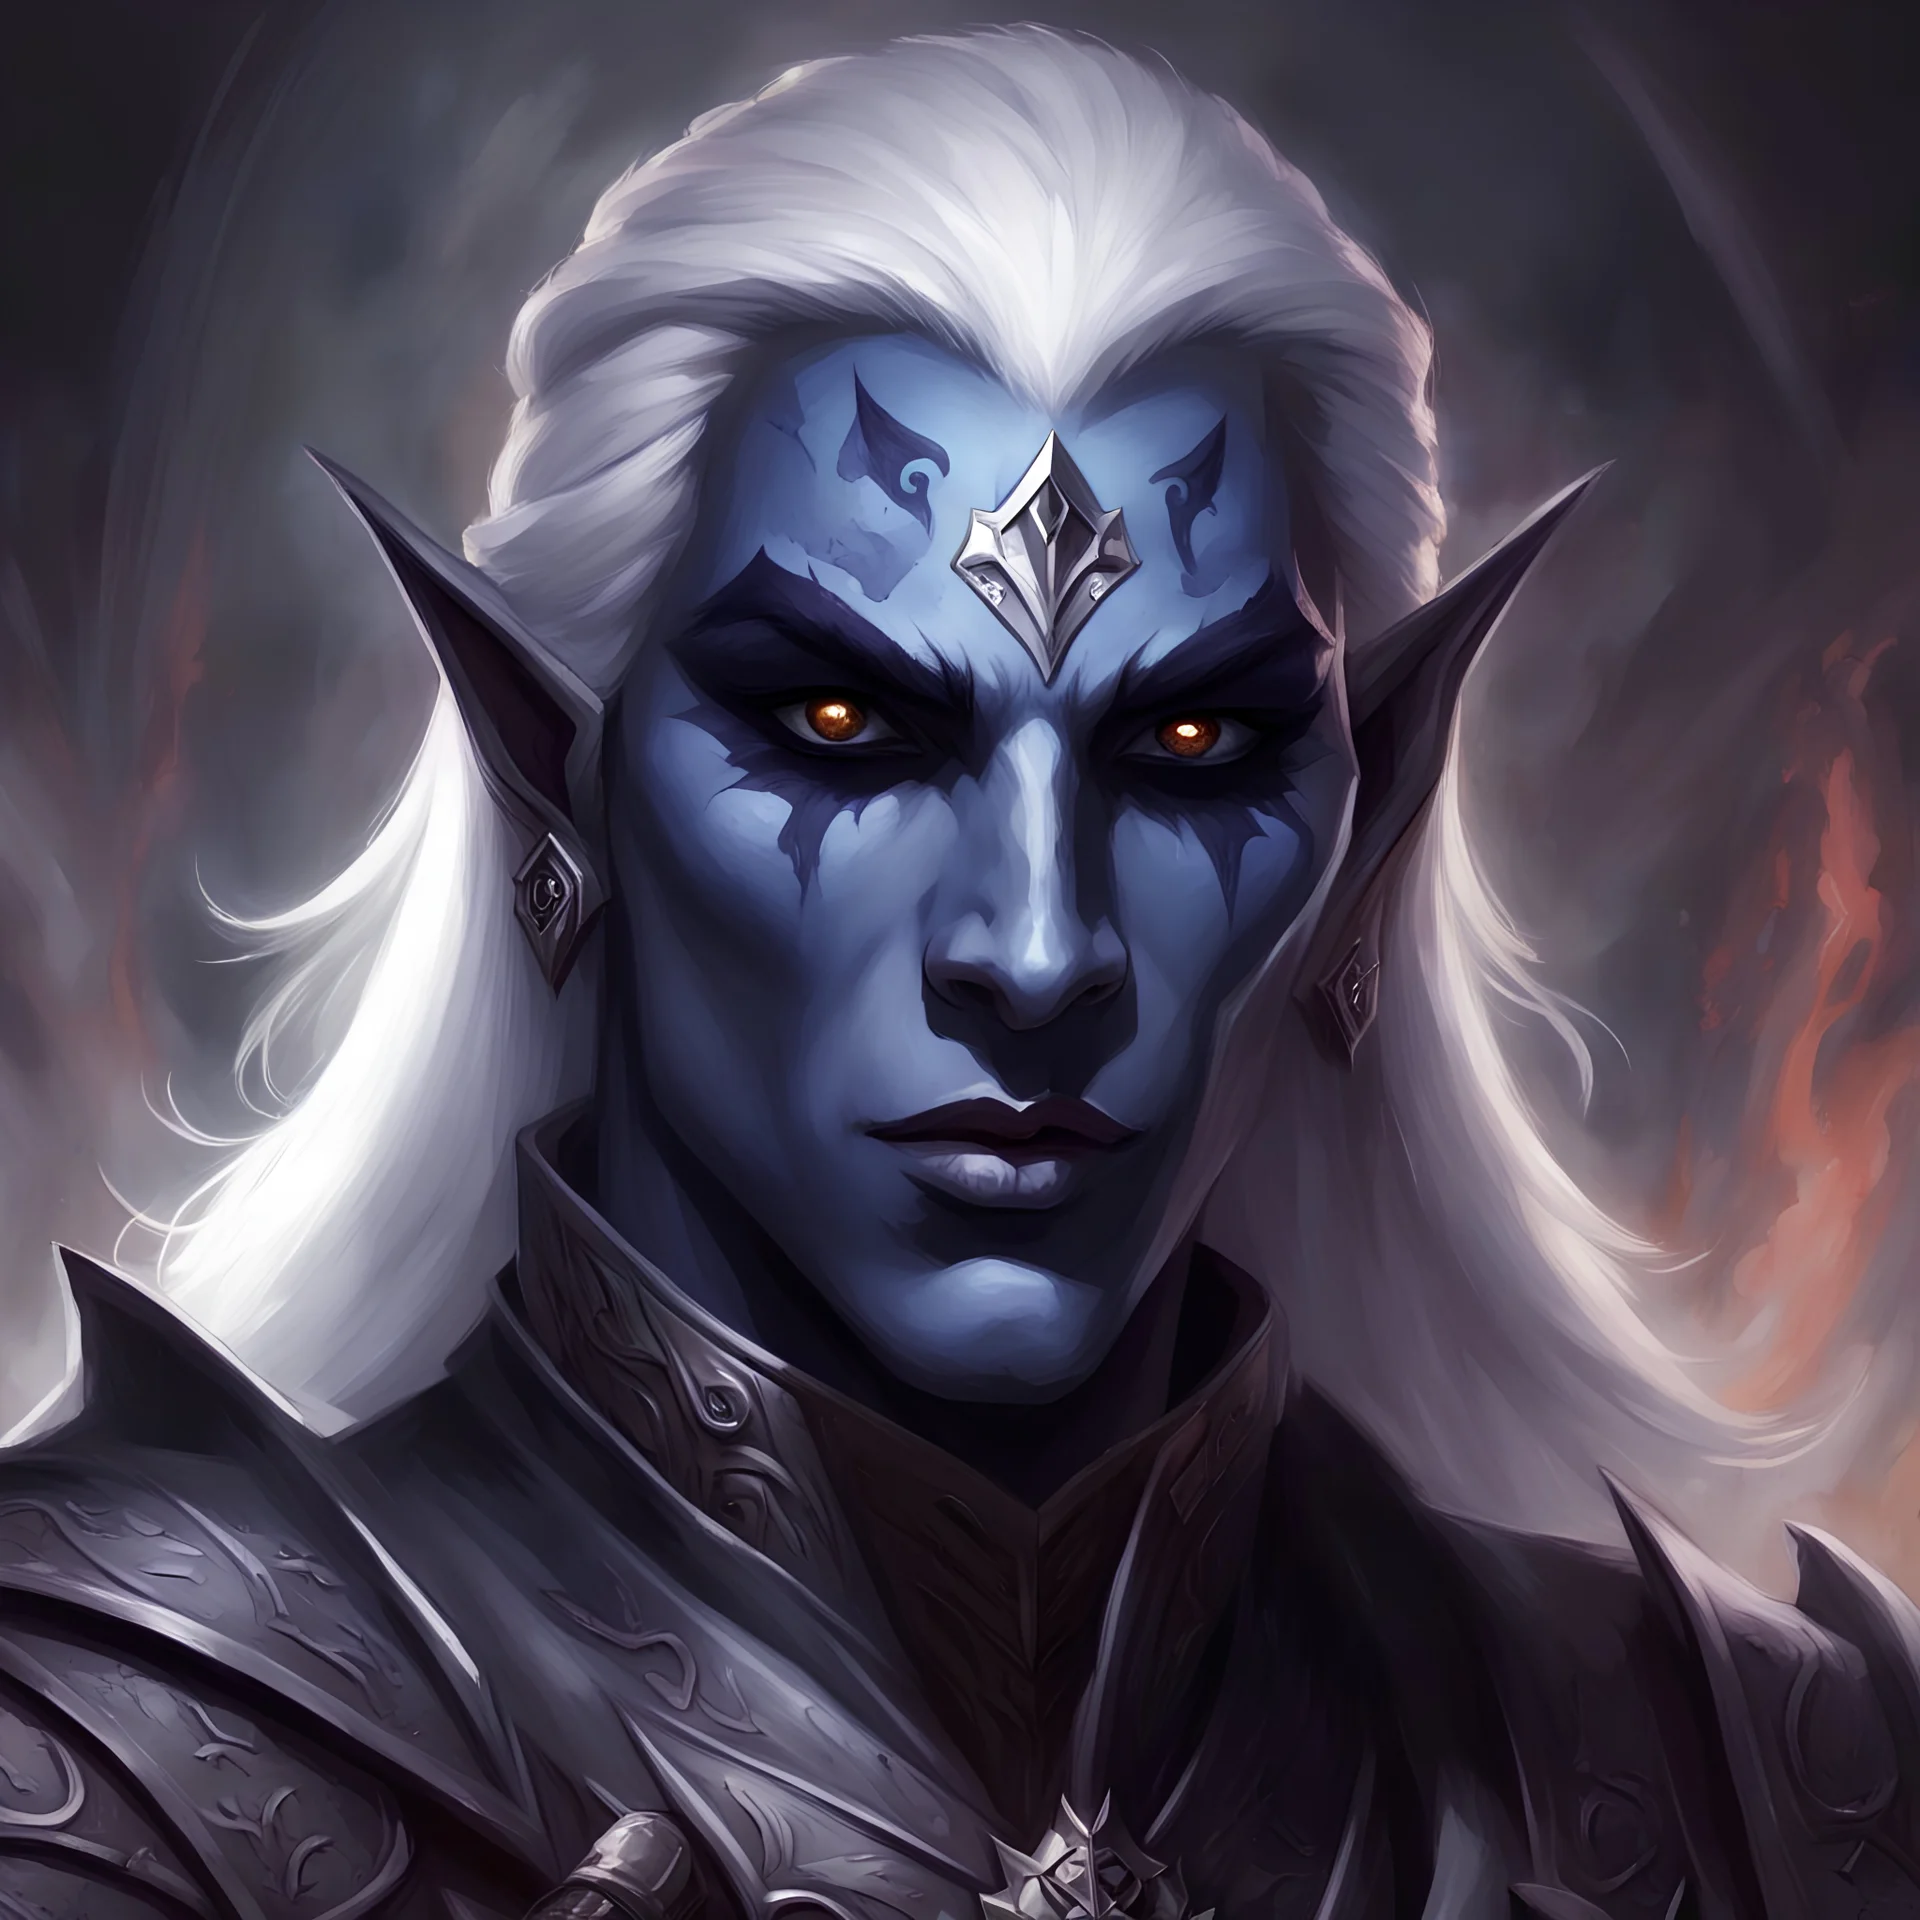 Generate a dungeons and dragons character portrait of the face of a male Drow named Valas. He is striking, handsome and has facepaint on his face. He is sworn to the evil goddess Lolth and he is shrouded in darkness. He is a War Cleric soldier.